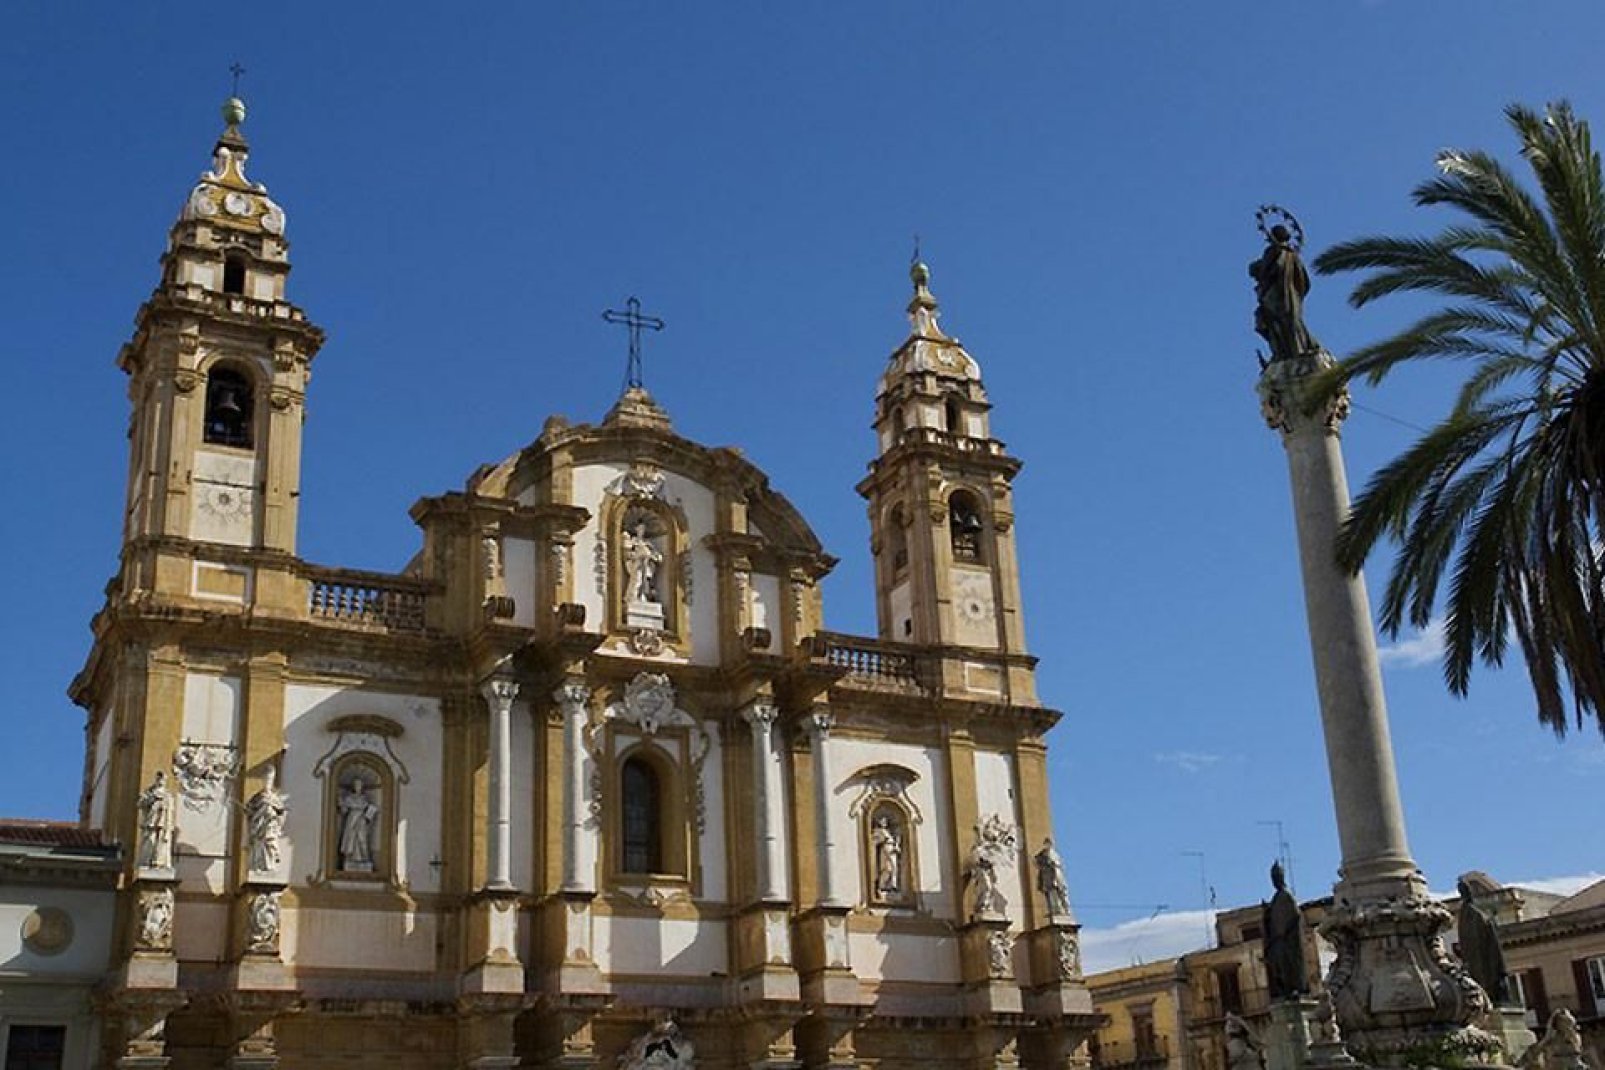 The Basilica of San Domenico, located on the square of the same name in the La Loggia neighbourhood, is the second largest place of worship in Palermo after the cathedral.